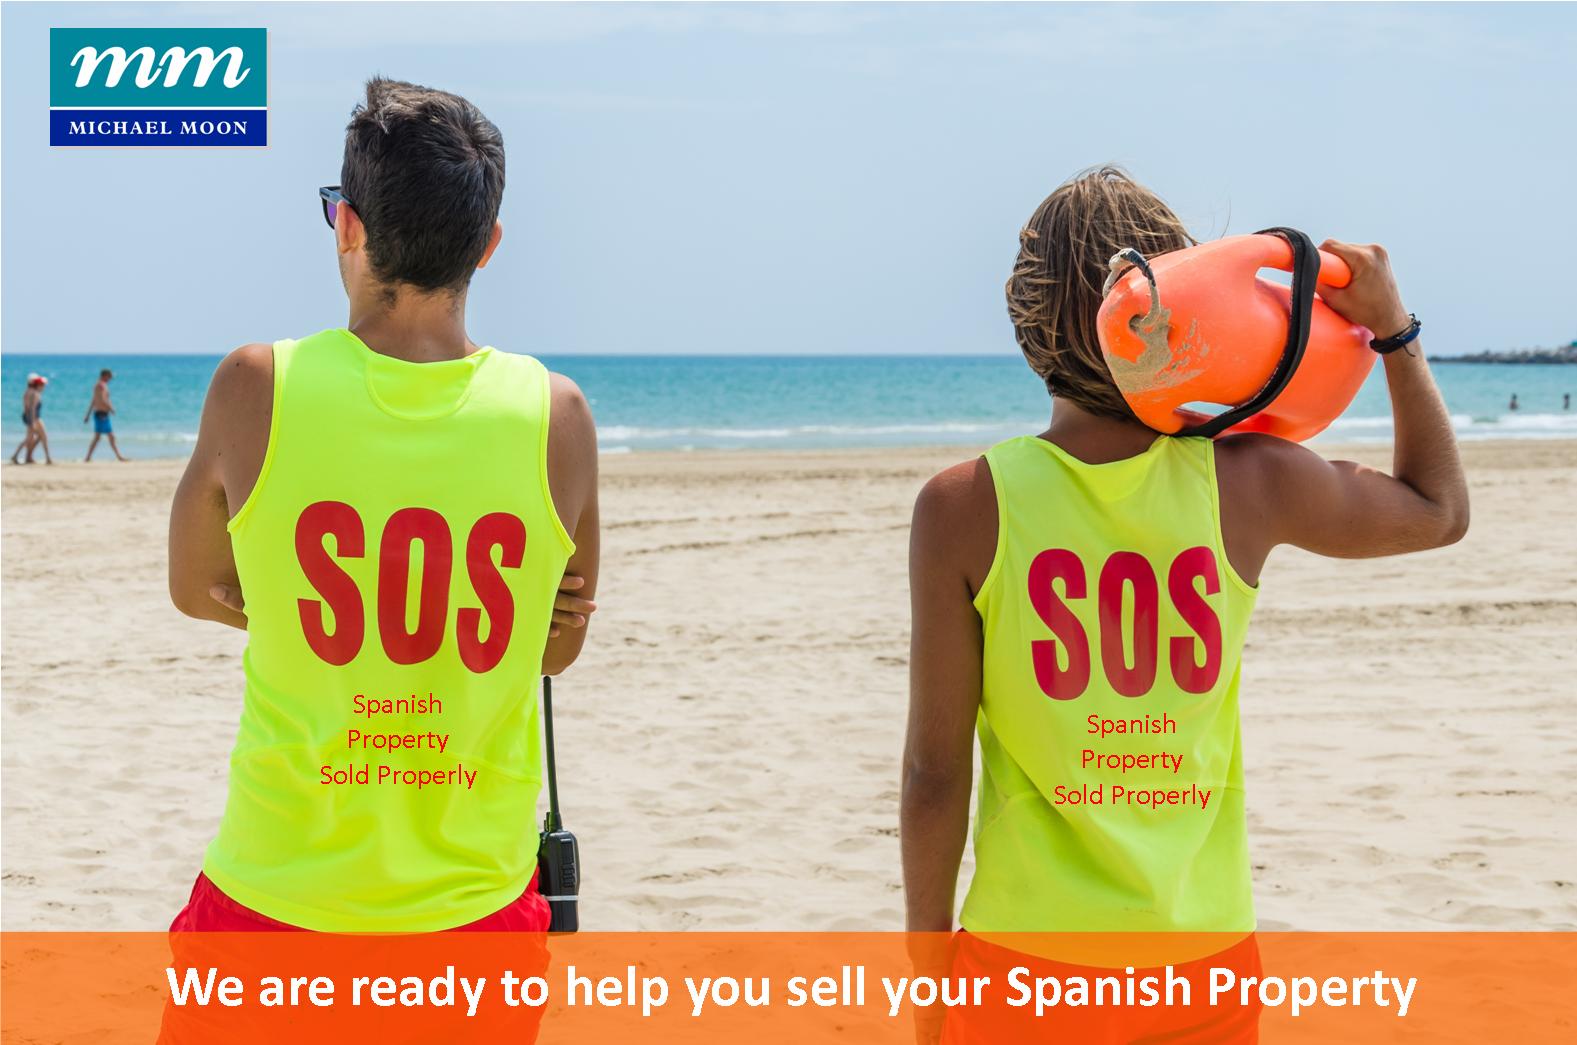 We are here to help you sell your Spanish Property